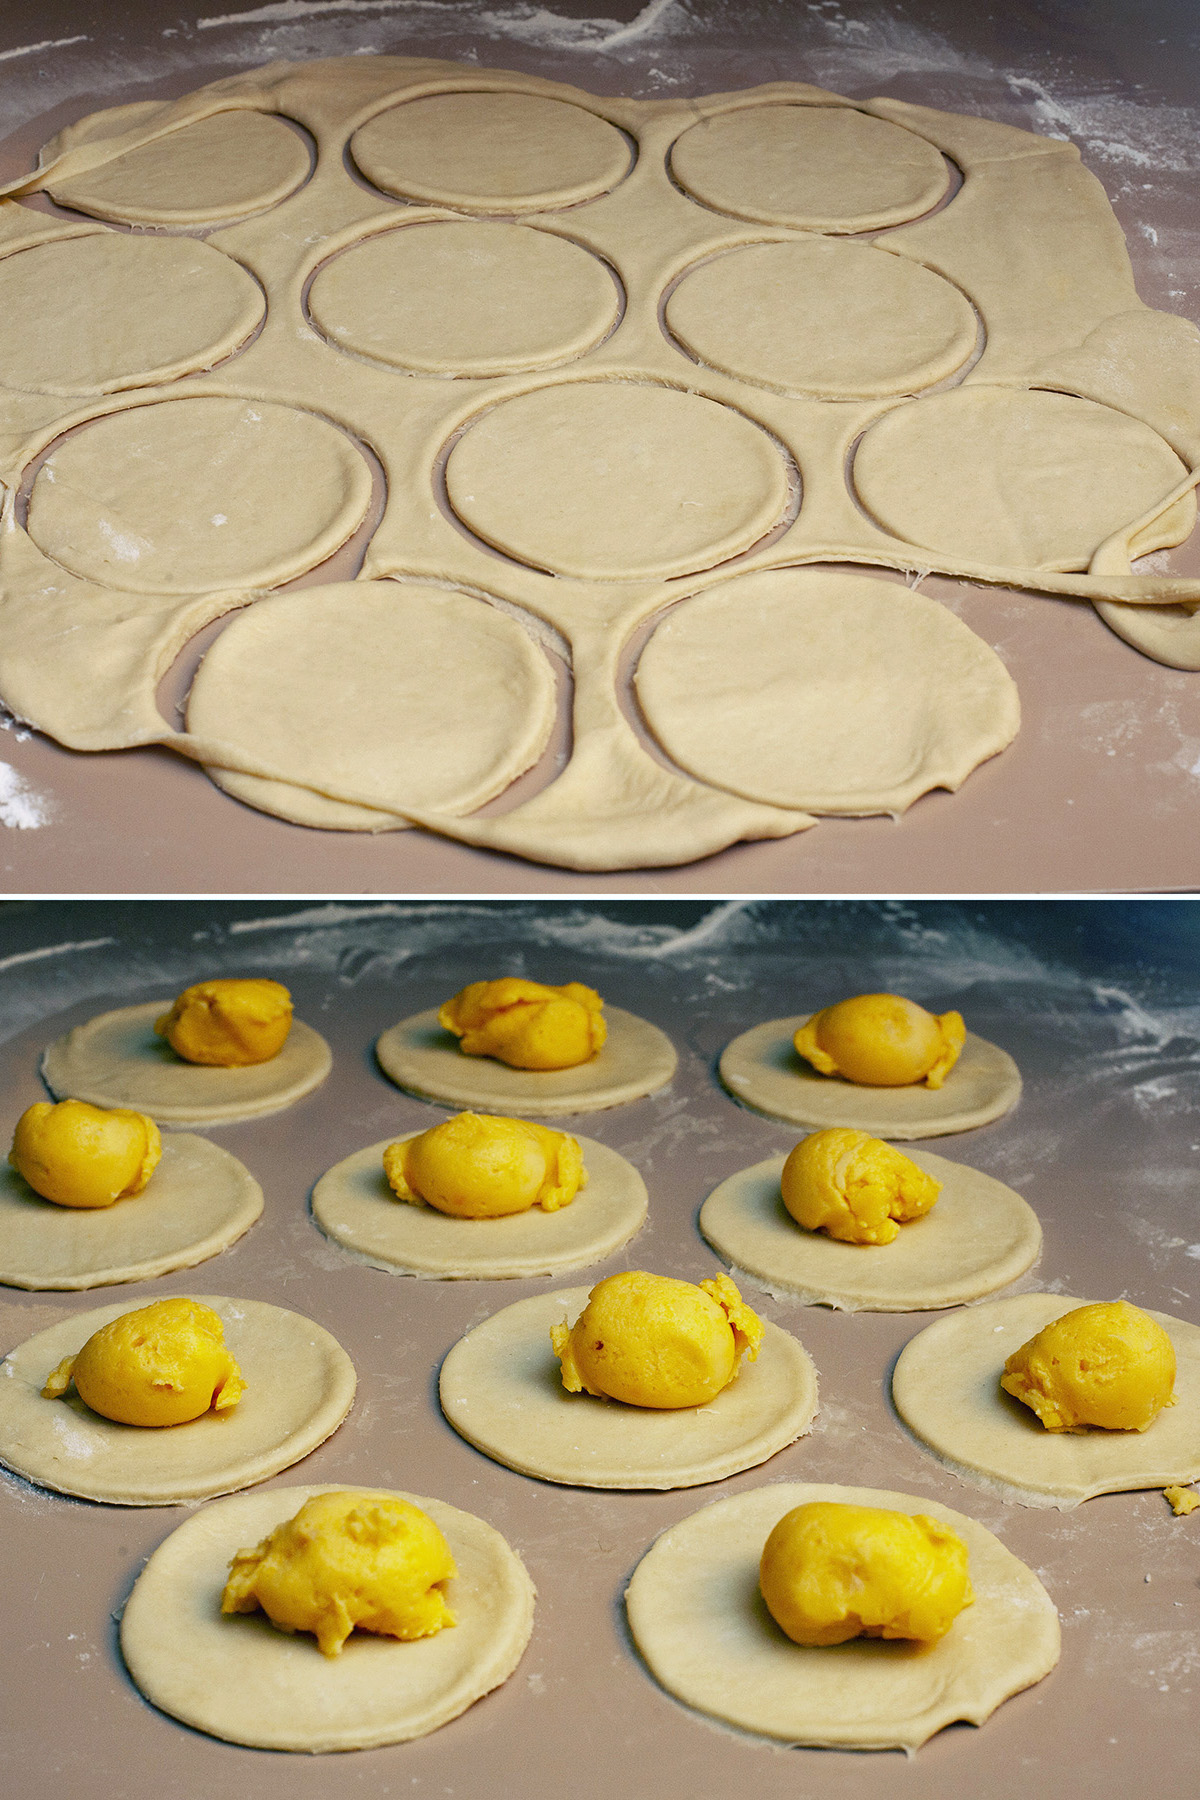 A two part image showing dough rolled out and having circles cut from it, then those circles each topped with a round of cheesy potato filling.